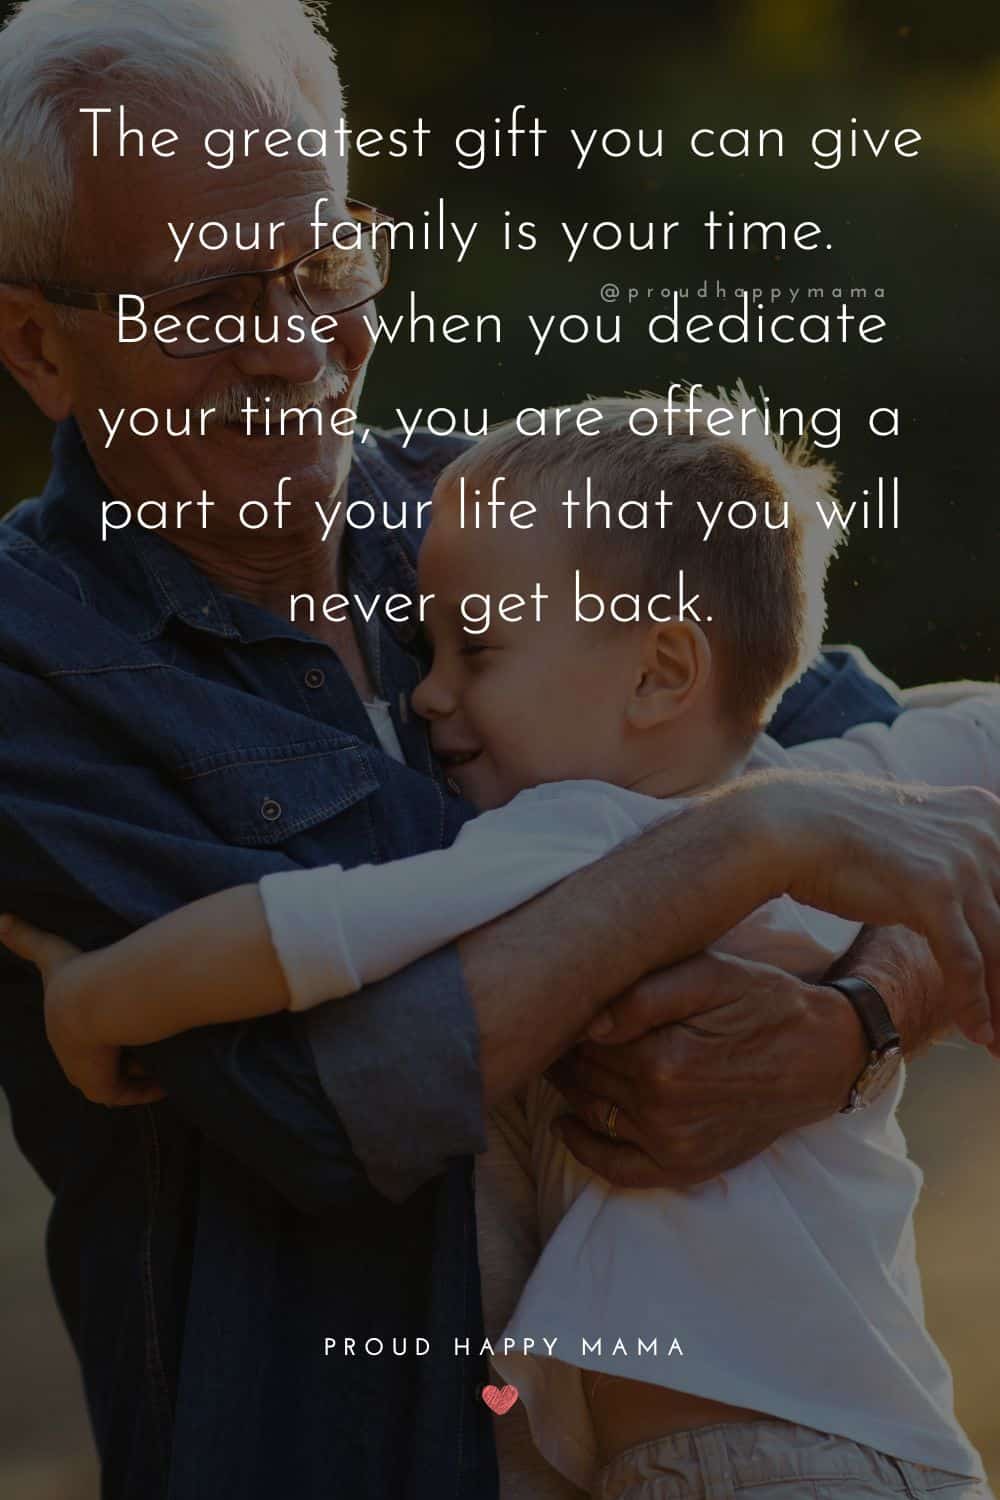 time with family quotes - The greatest gift you can give your family is your time. Because when you dedicate your time, you are offering a part of your life that you will never get back.